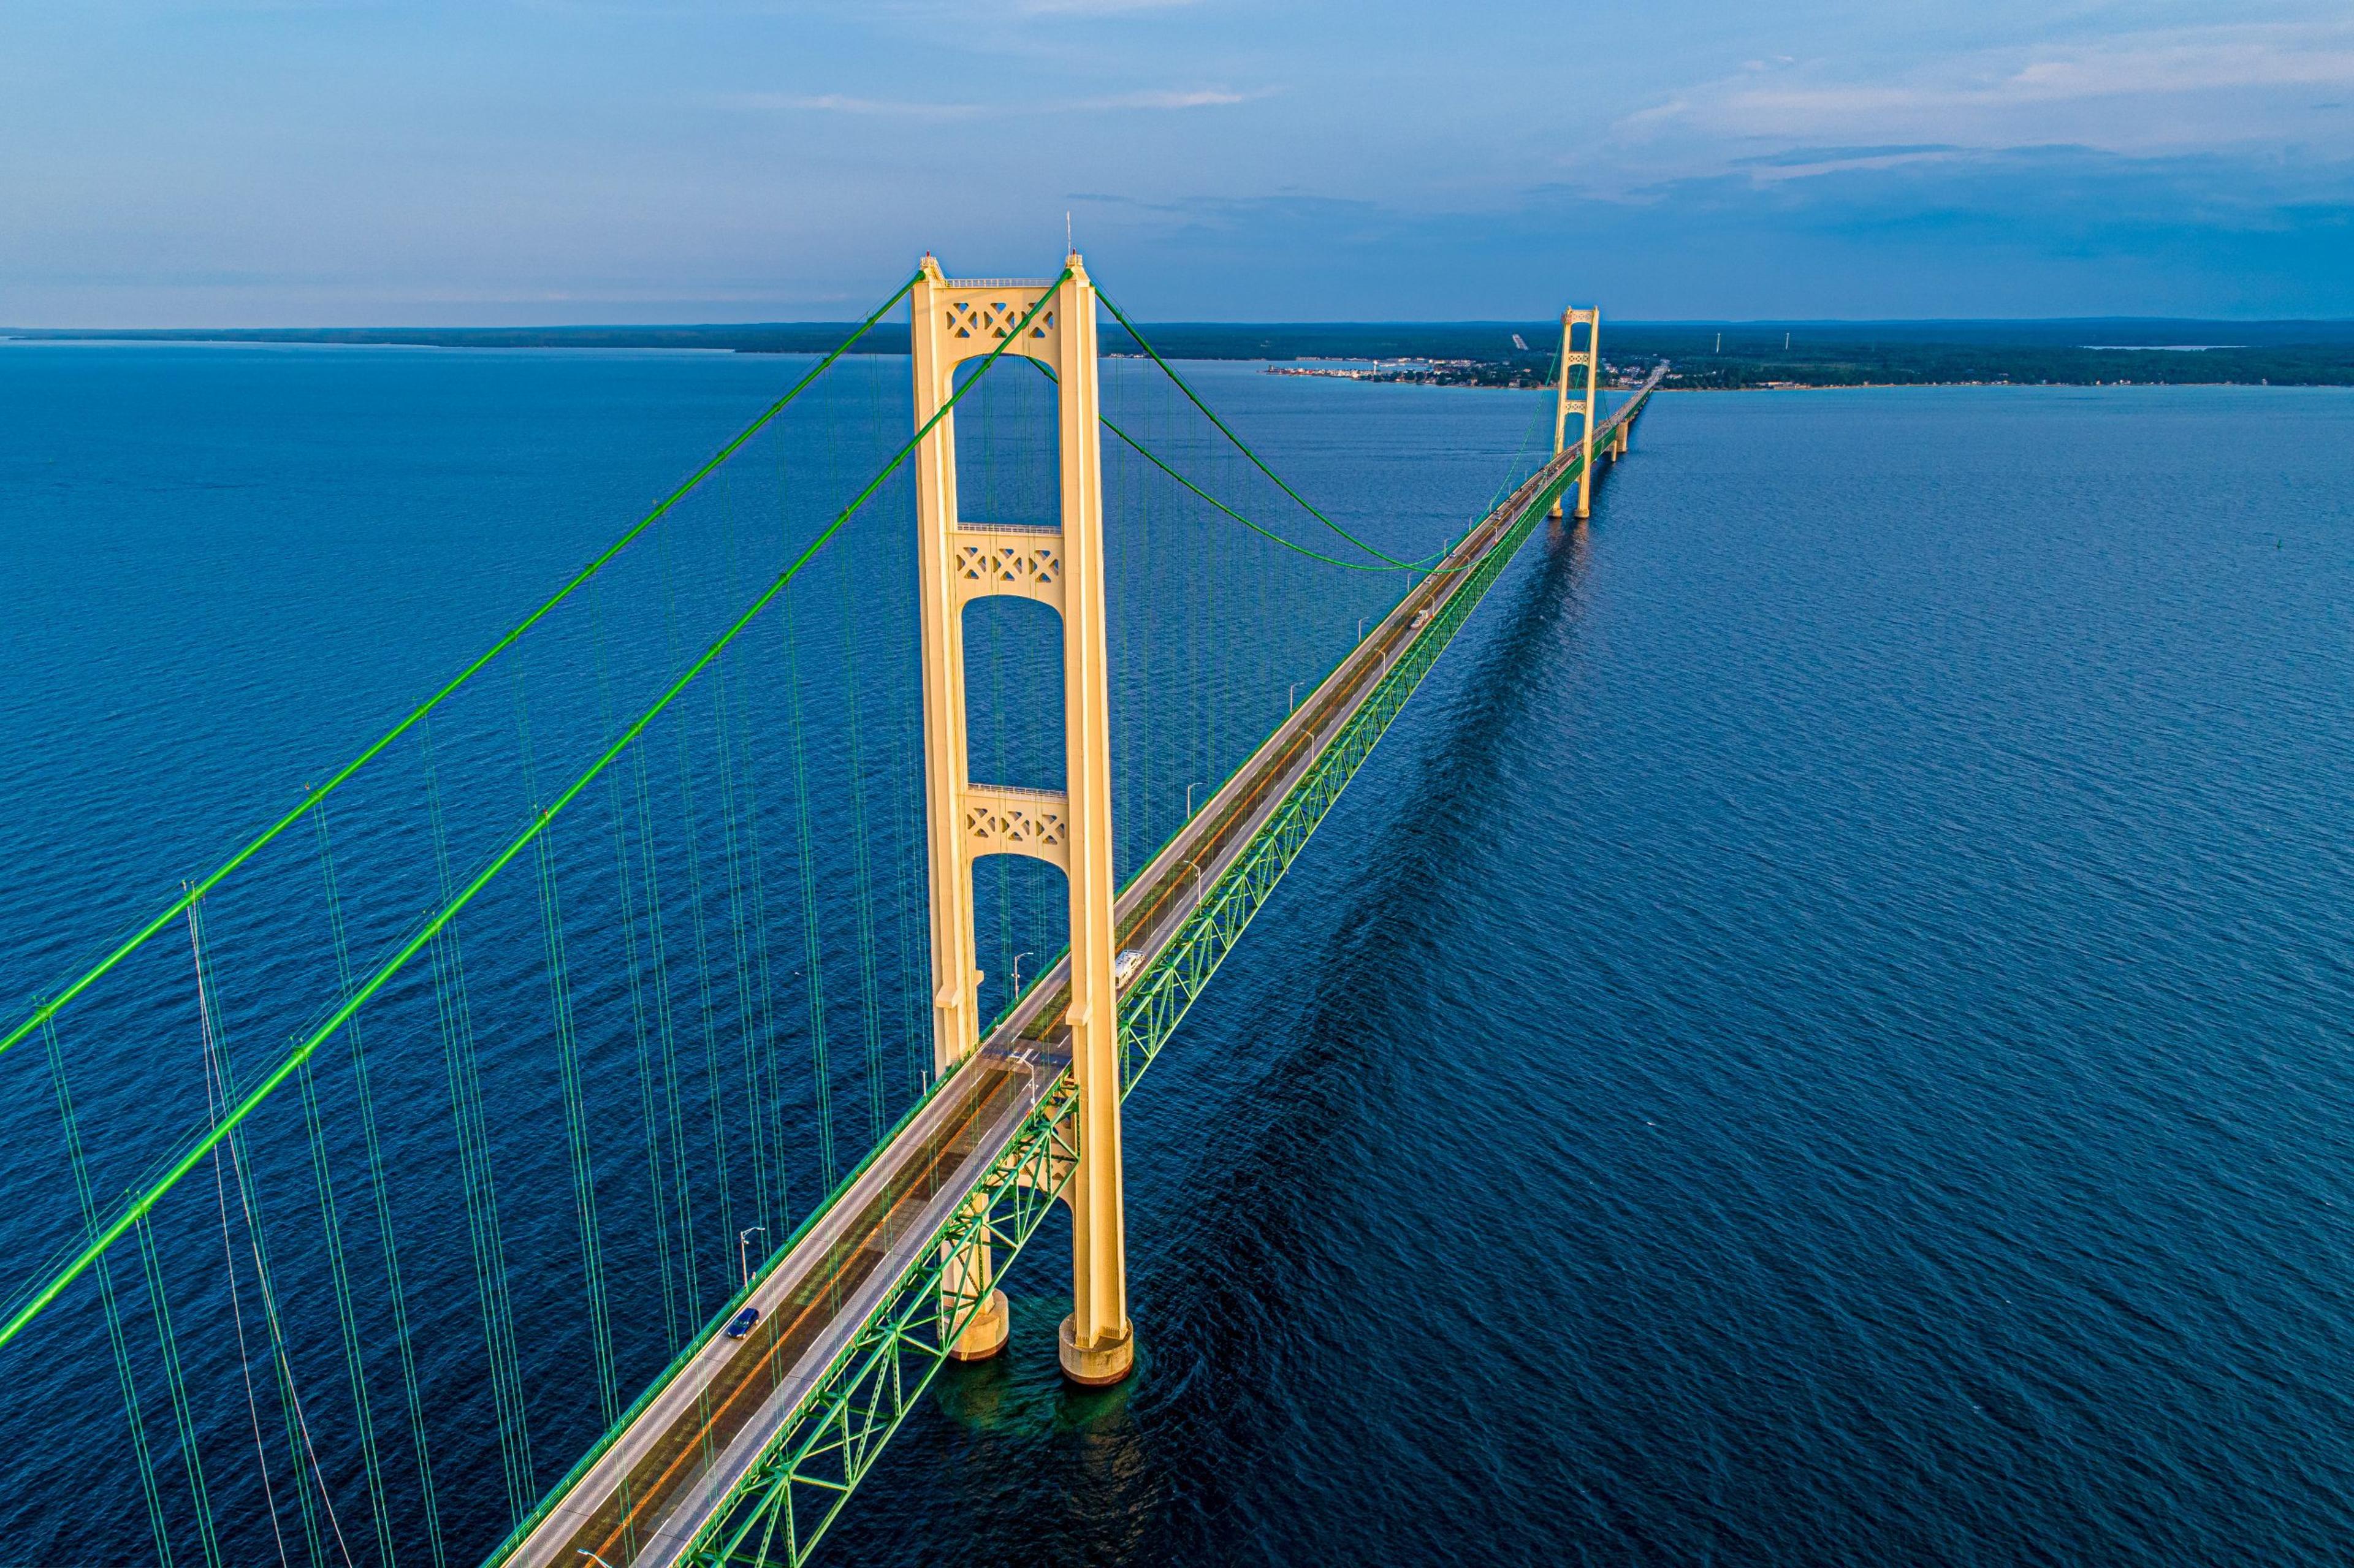 The Mackinac Bridge stands tall over the deep blue waters of the lake on a sunny day.